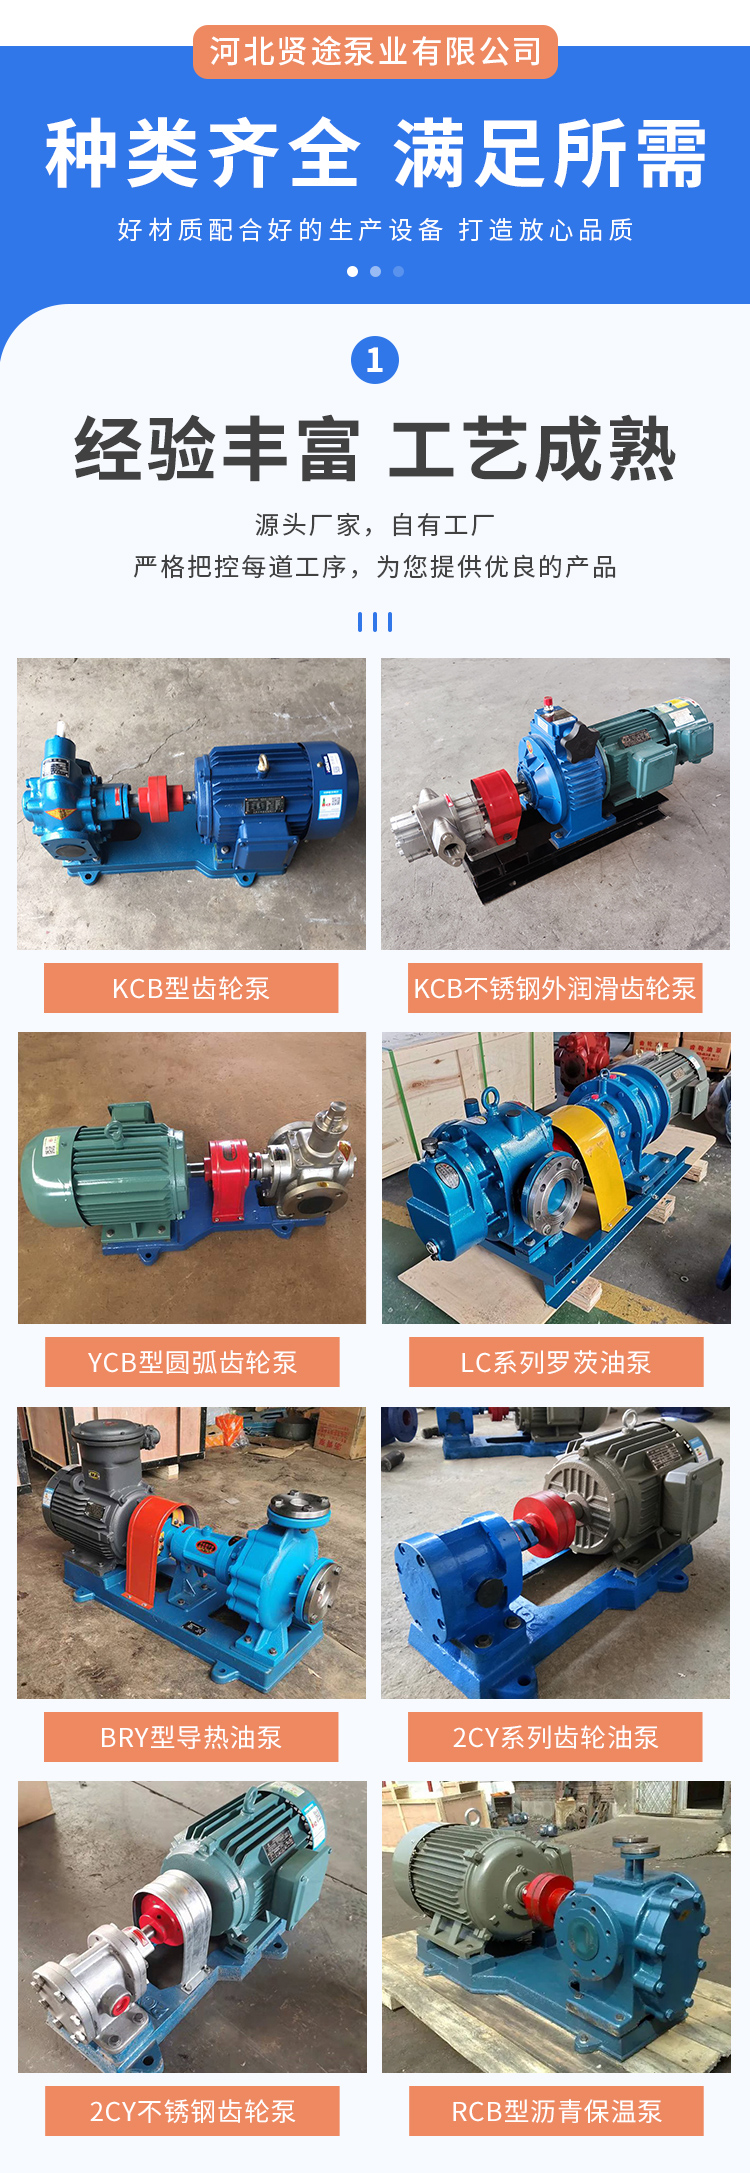 High pressure gear pump ignition oil pump ZYB series turbocharged fuel pump customized according to needs